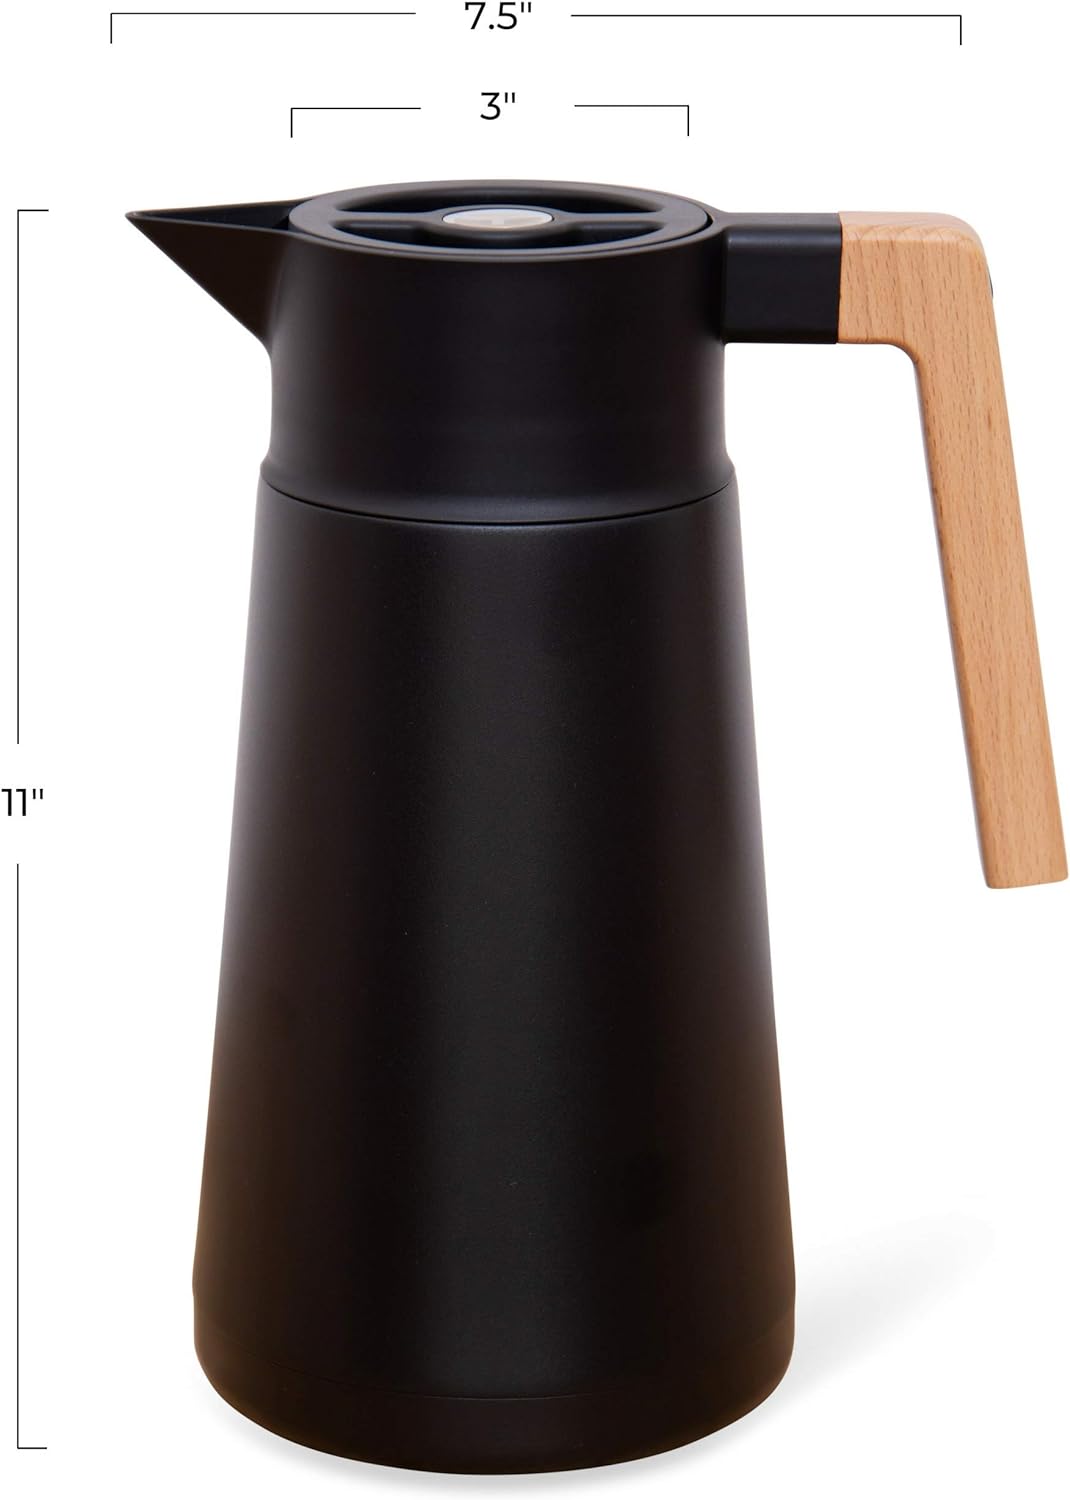 8541894103 Hastings Collective Thermal Coffee Carafe 68 Oz - Large